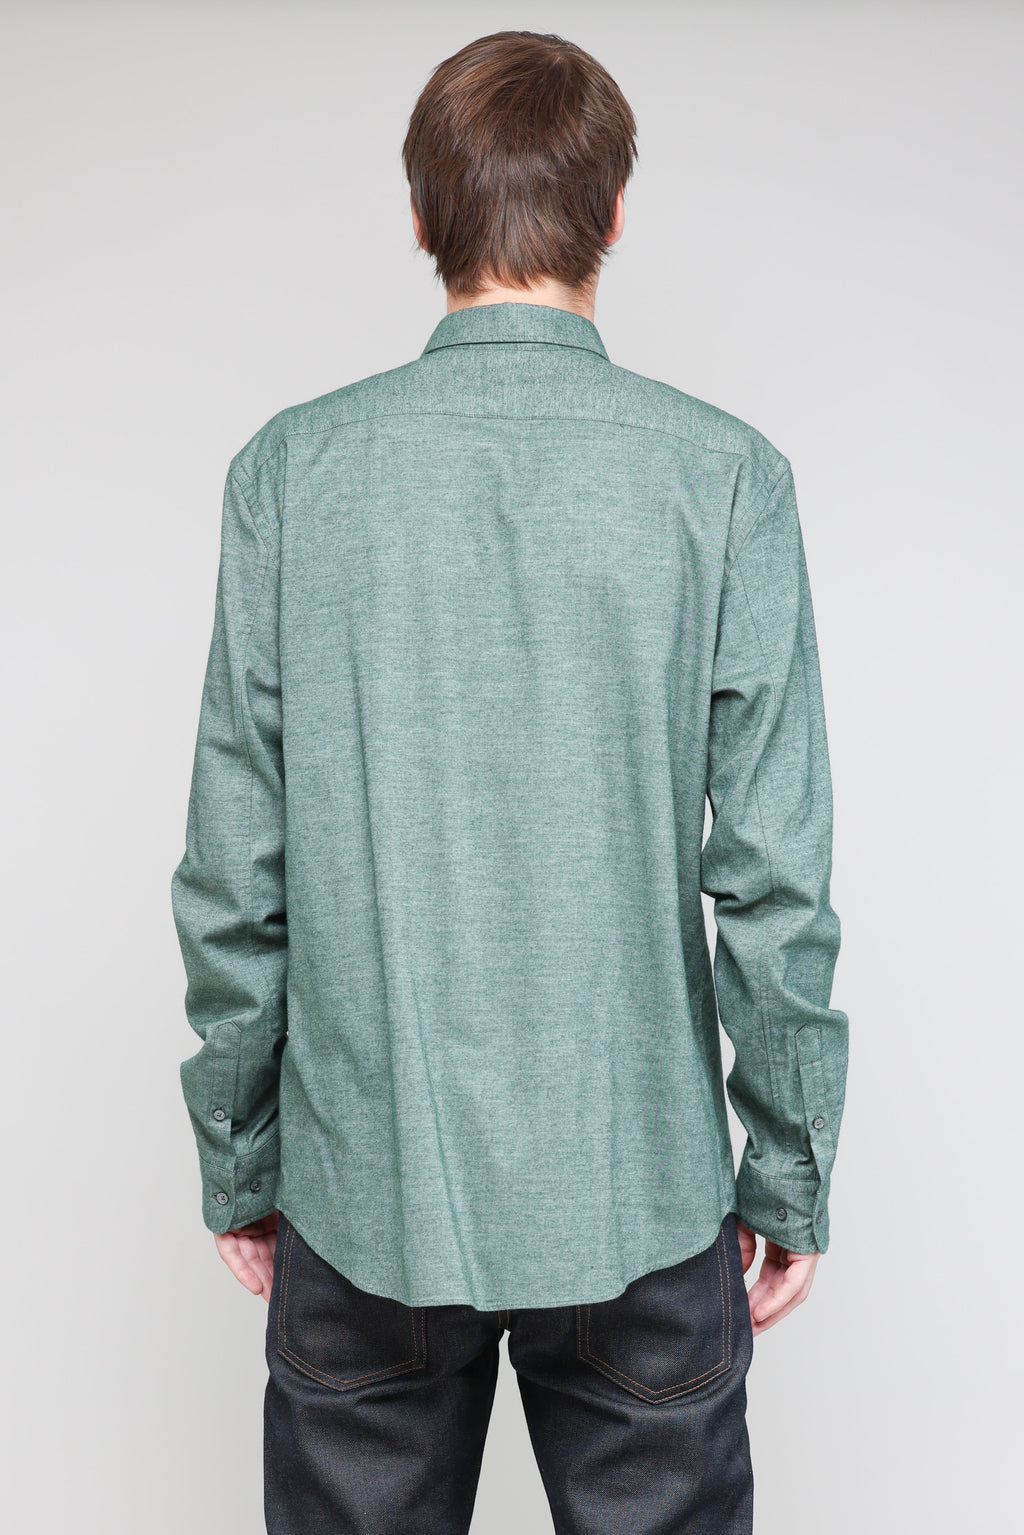 Japanese Brushed Twill in Green 03